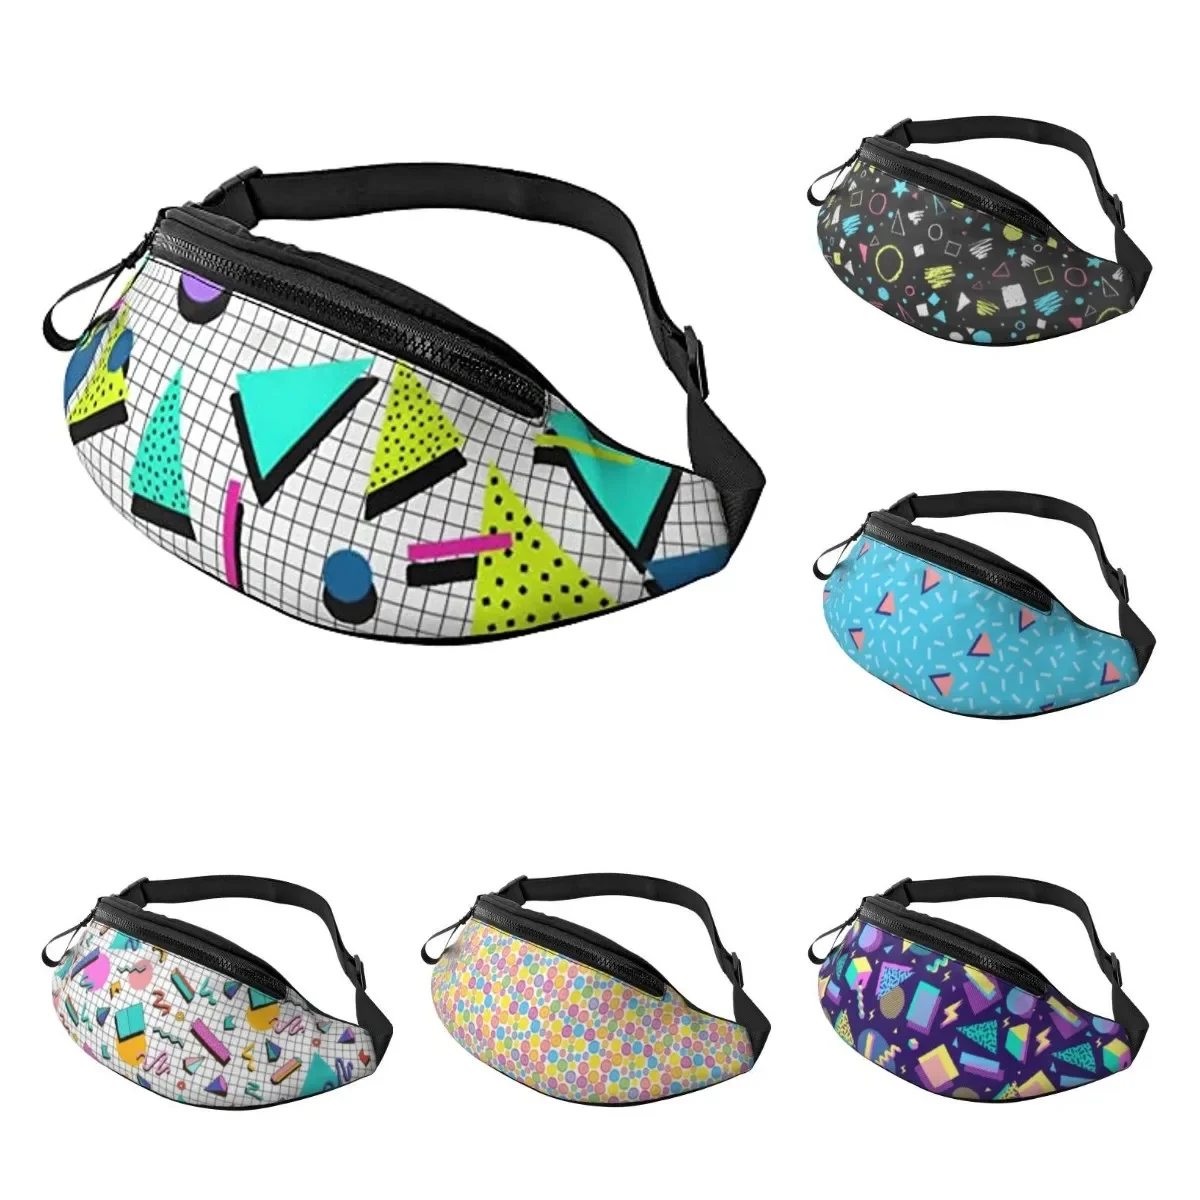 

Retro Style 80s 90s Memphis Style Design Fanny Pack for Men and Women Adjustable Casual Waist Bag for Traveling Hiking Cycling